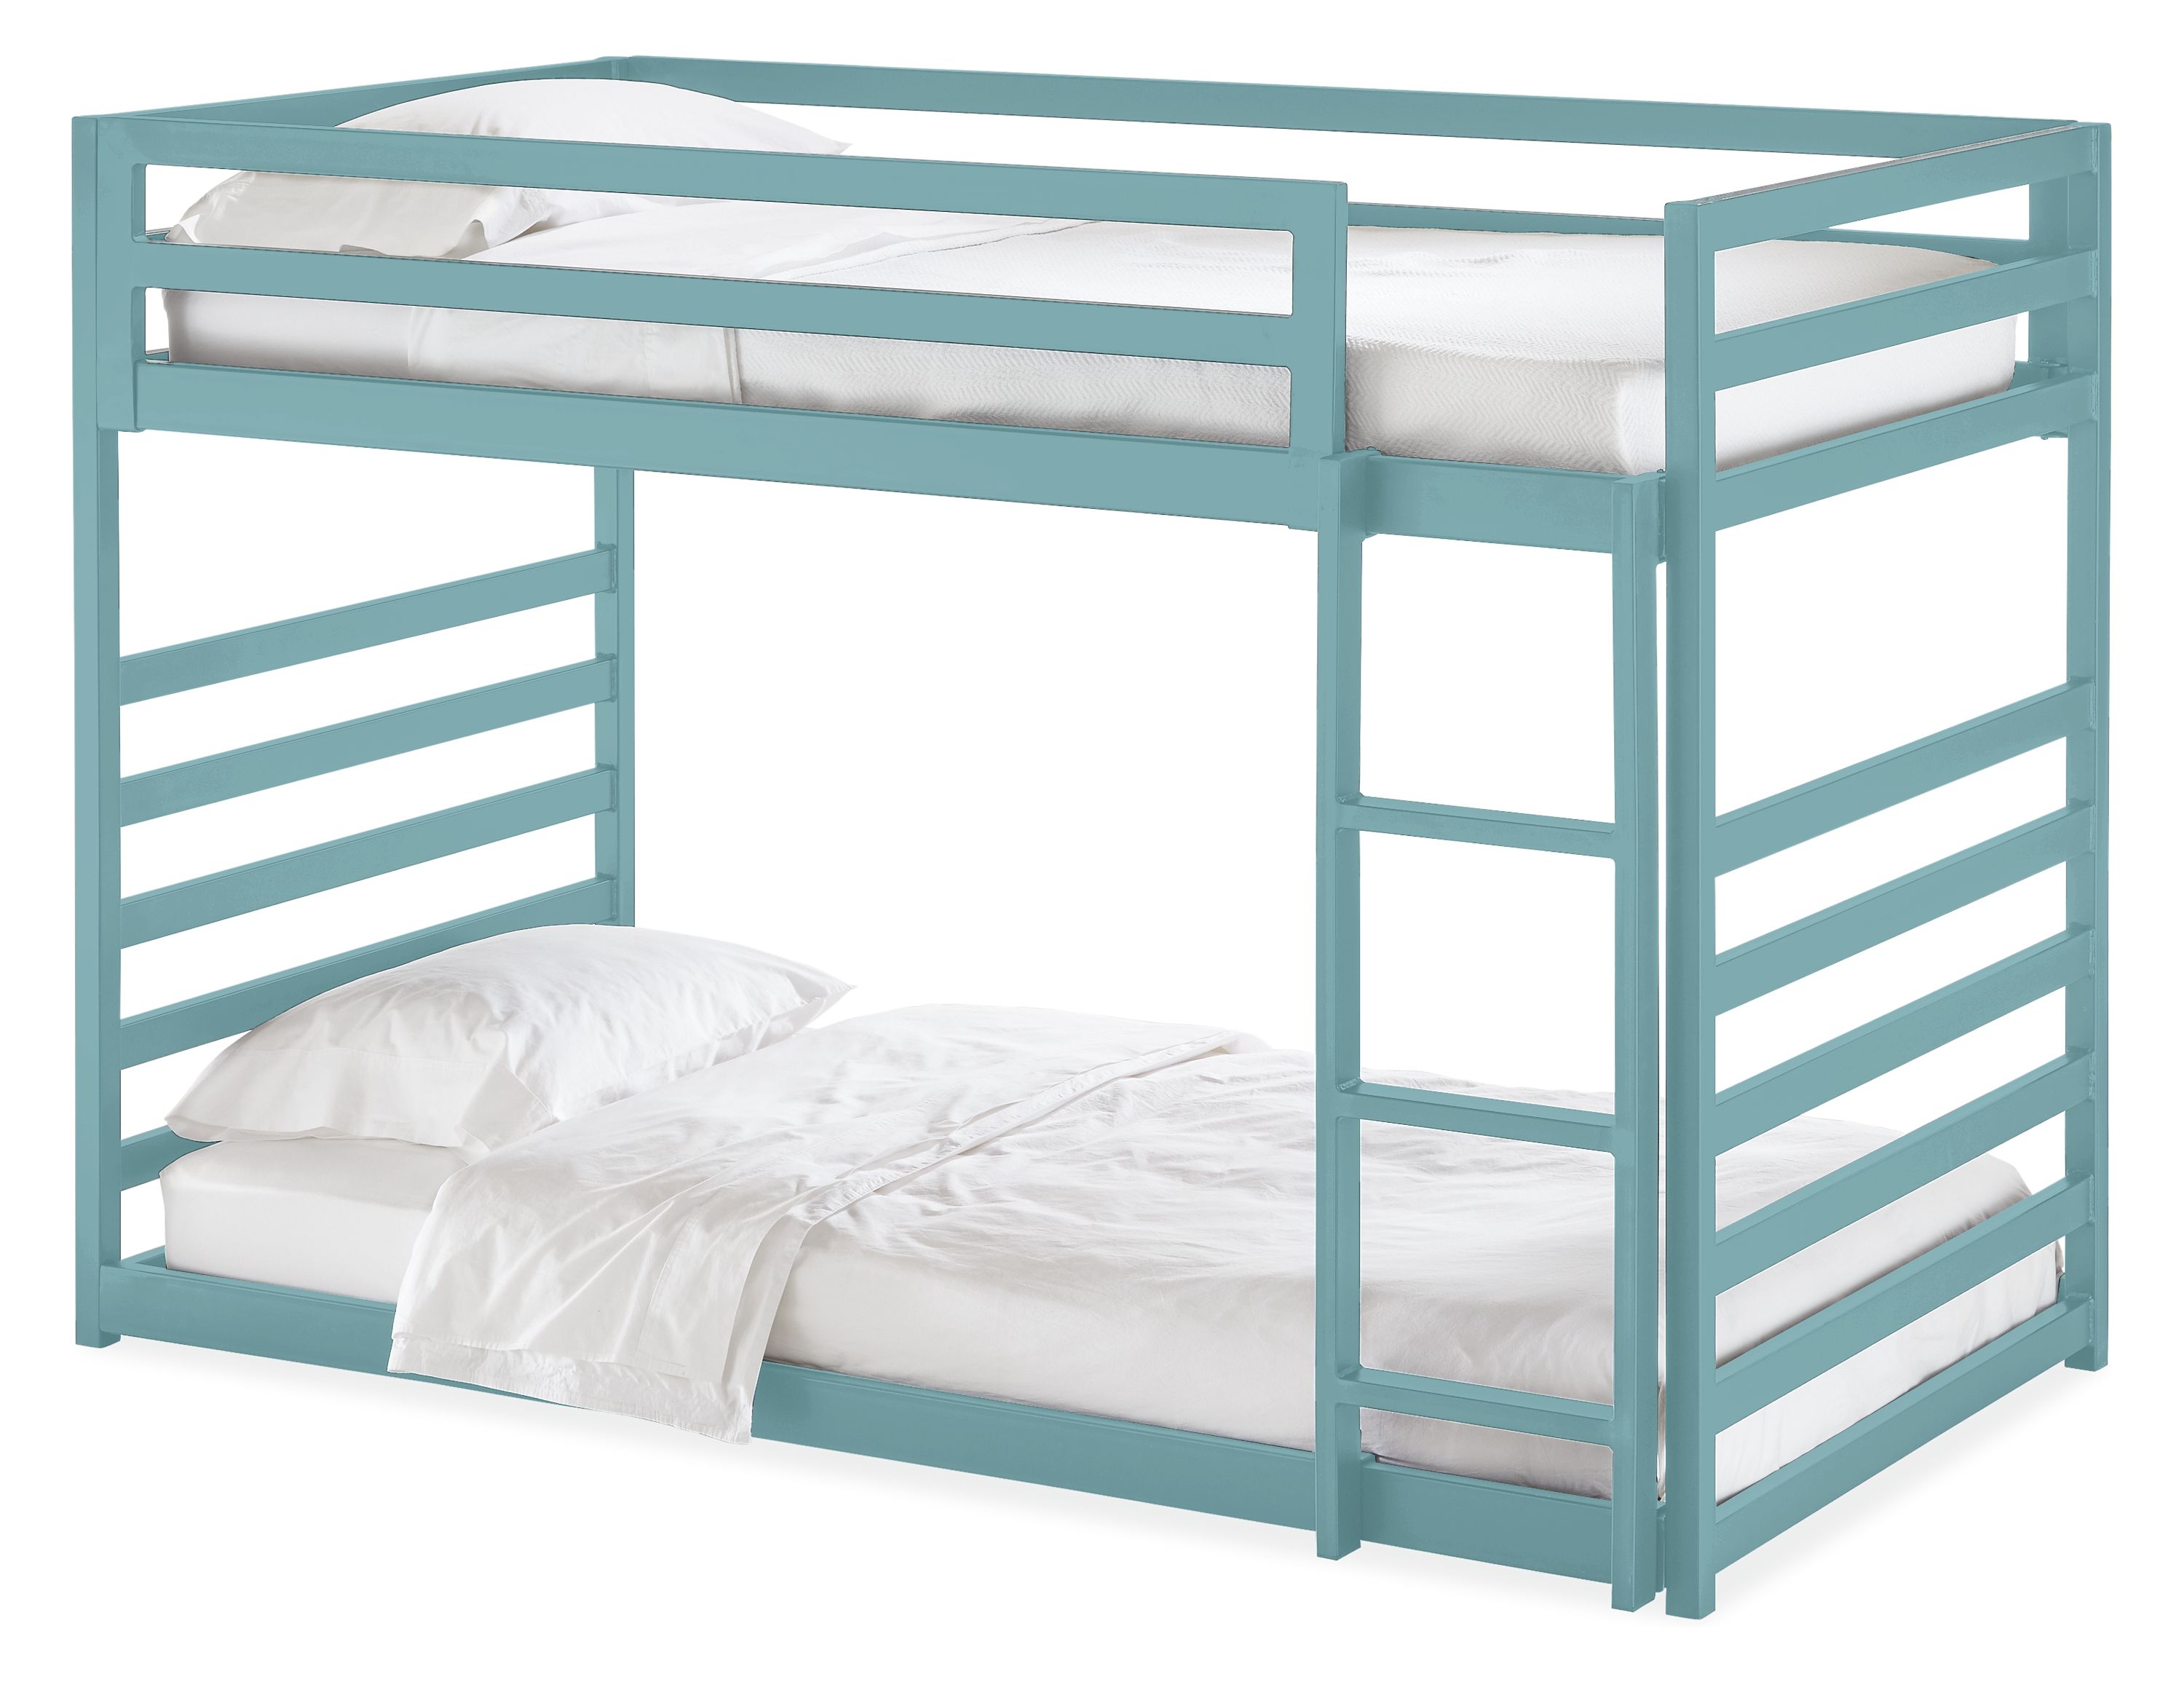 Fort Bunk Beds In Colors Twin Over, Avery Bunk Bed